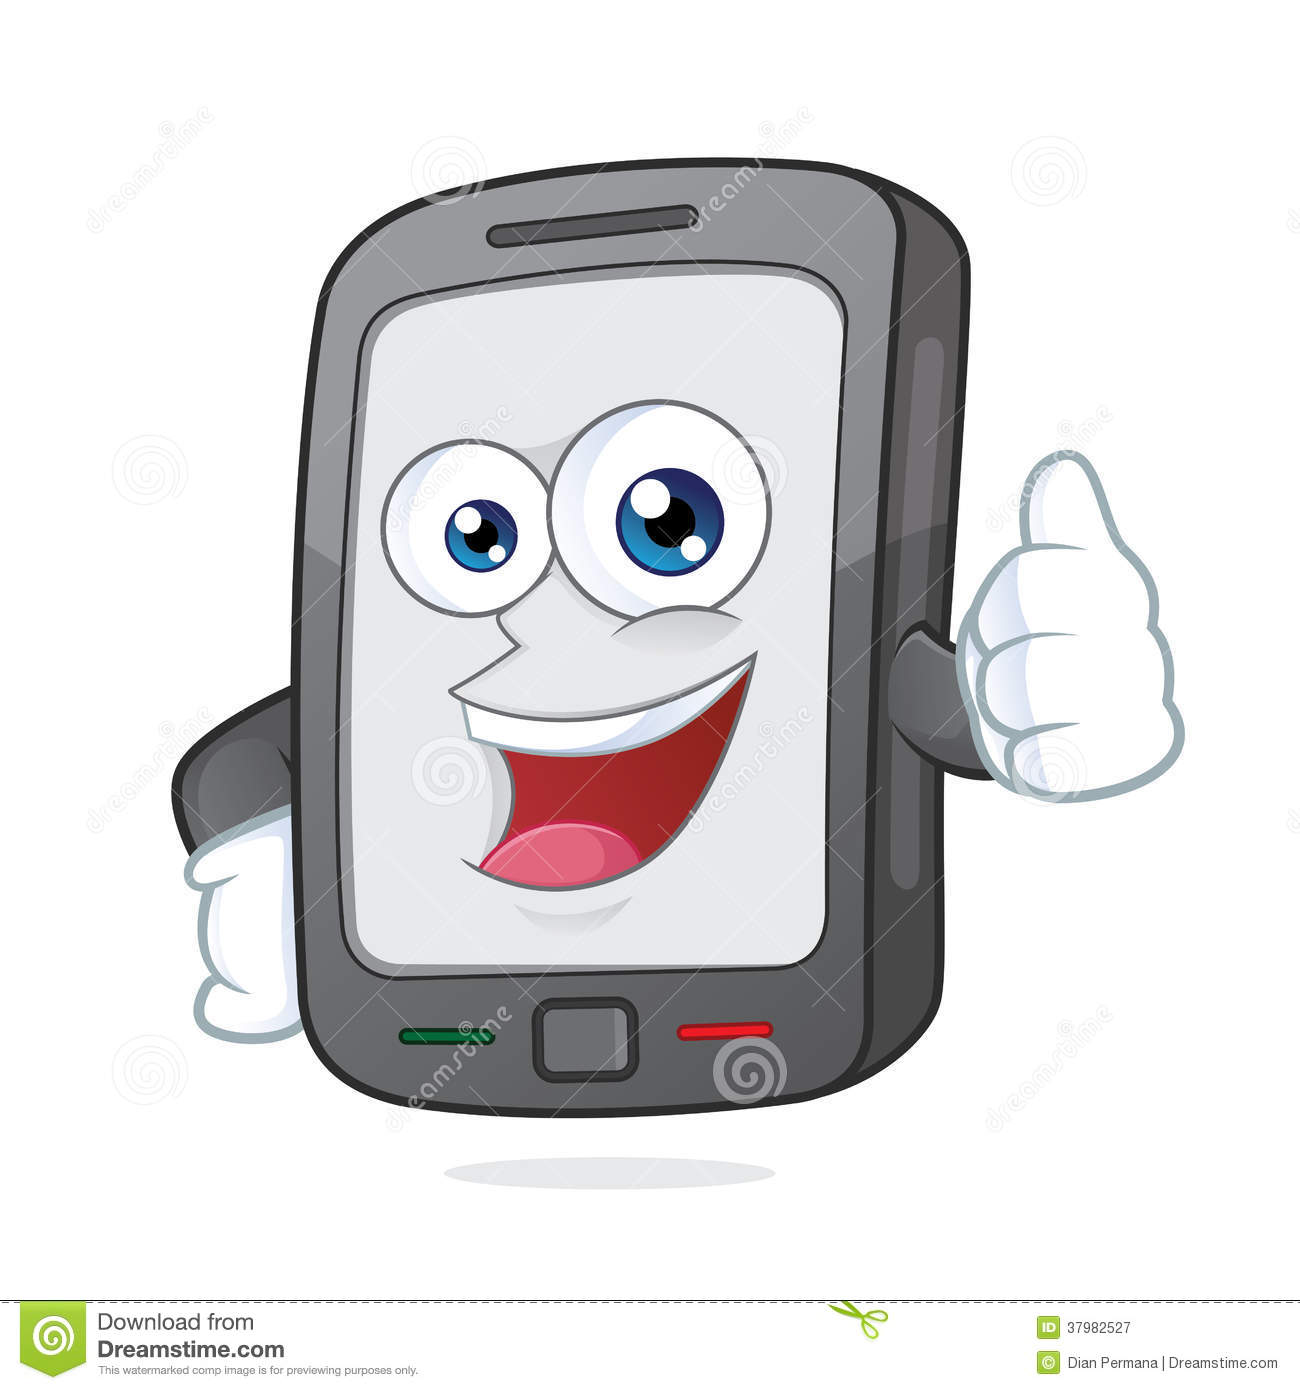 More Similar Stock Images Of   Smartphone Giving Thumb Up